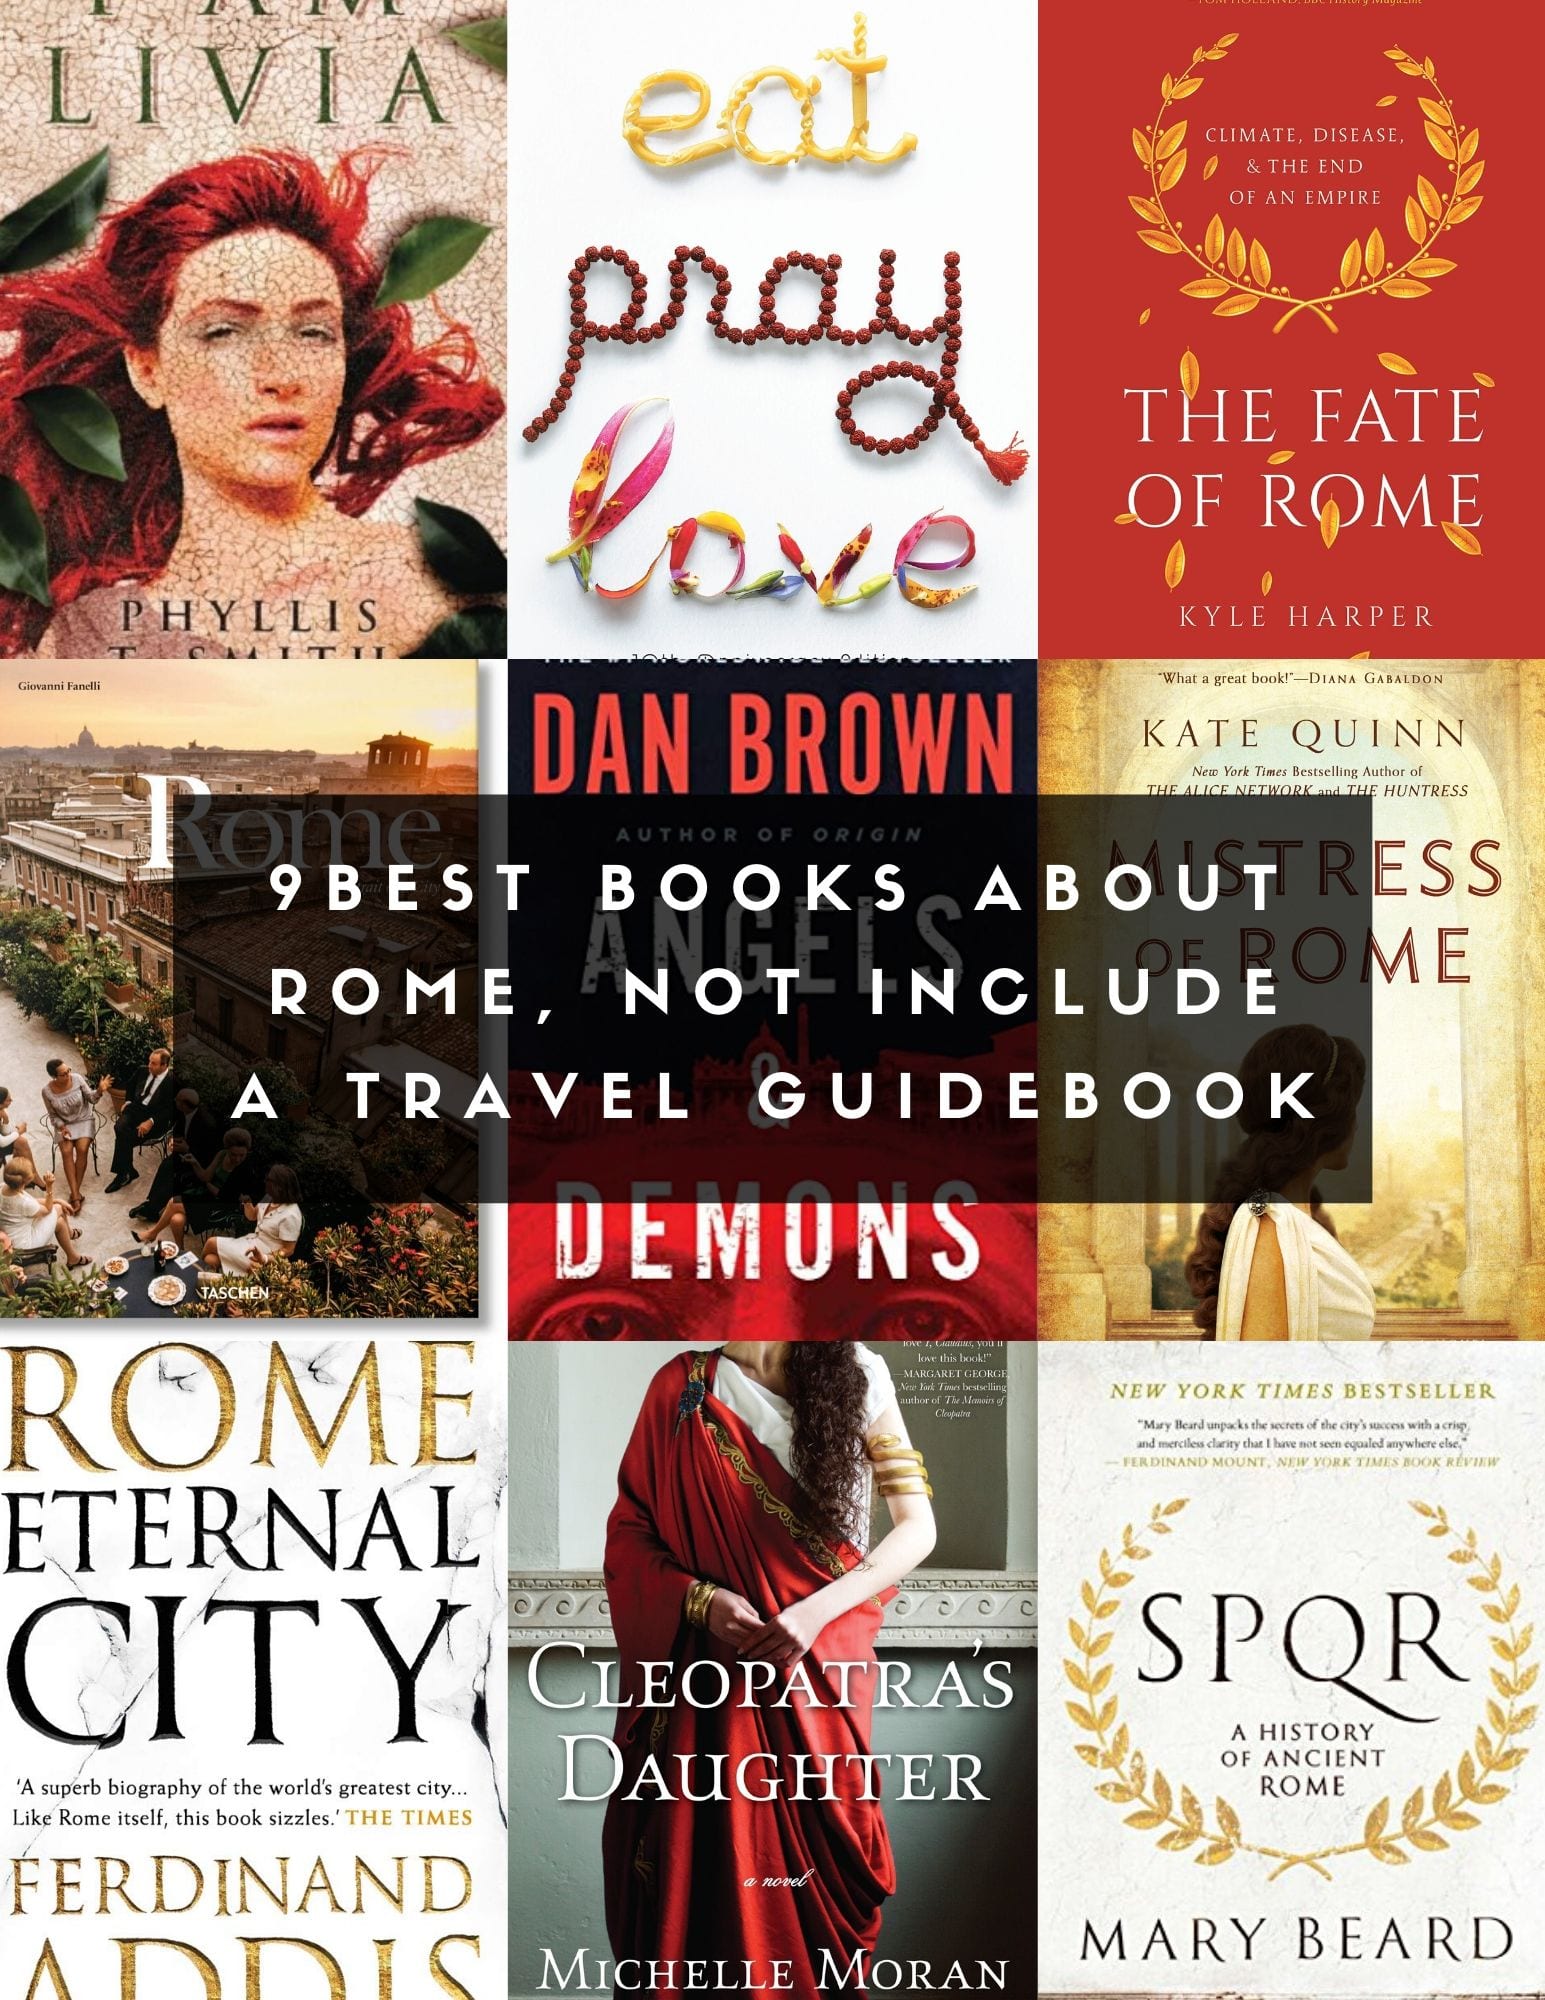 gustobeats blog post about 9 best books about rome including fictions set in ancient Rome and history books